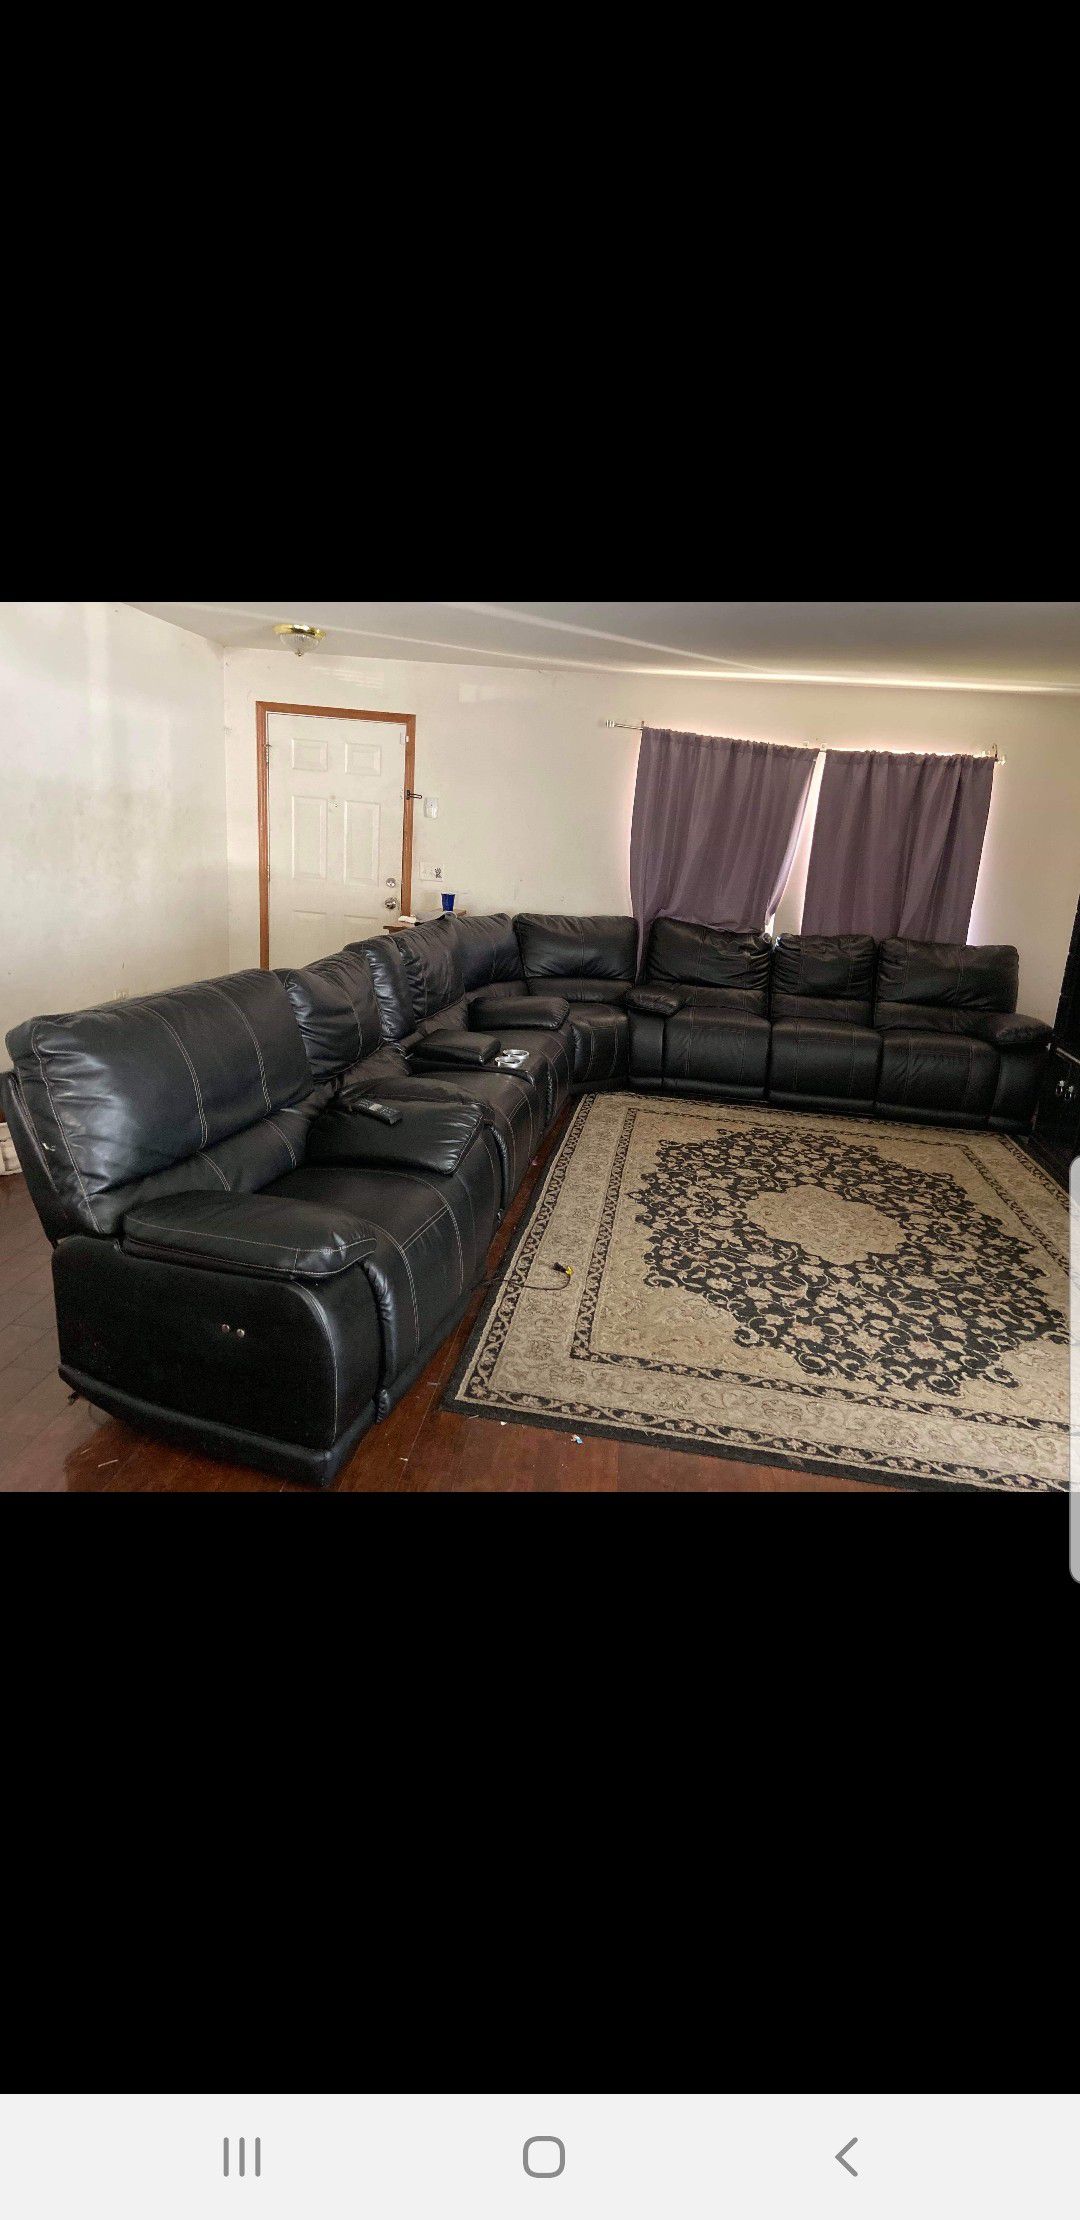 4 sectional couch black leather